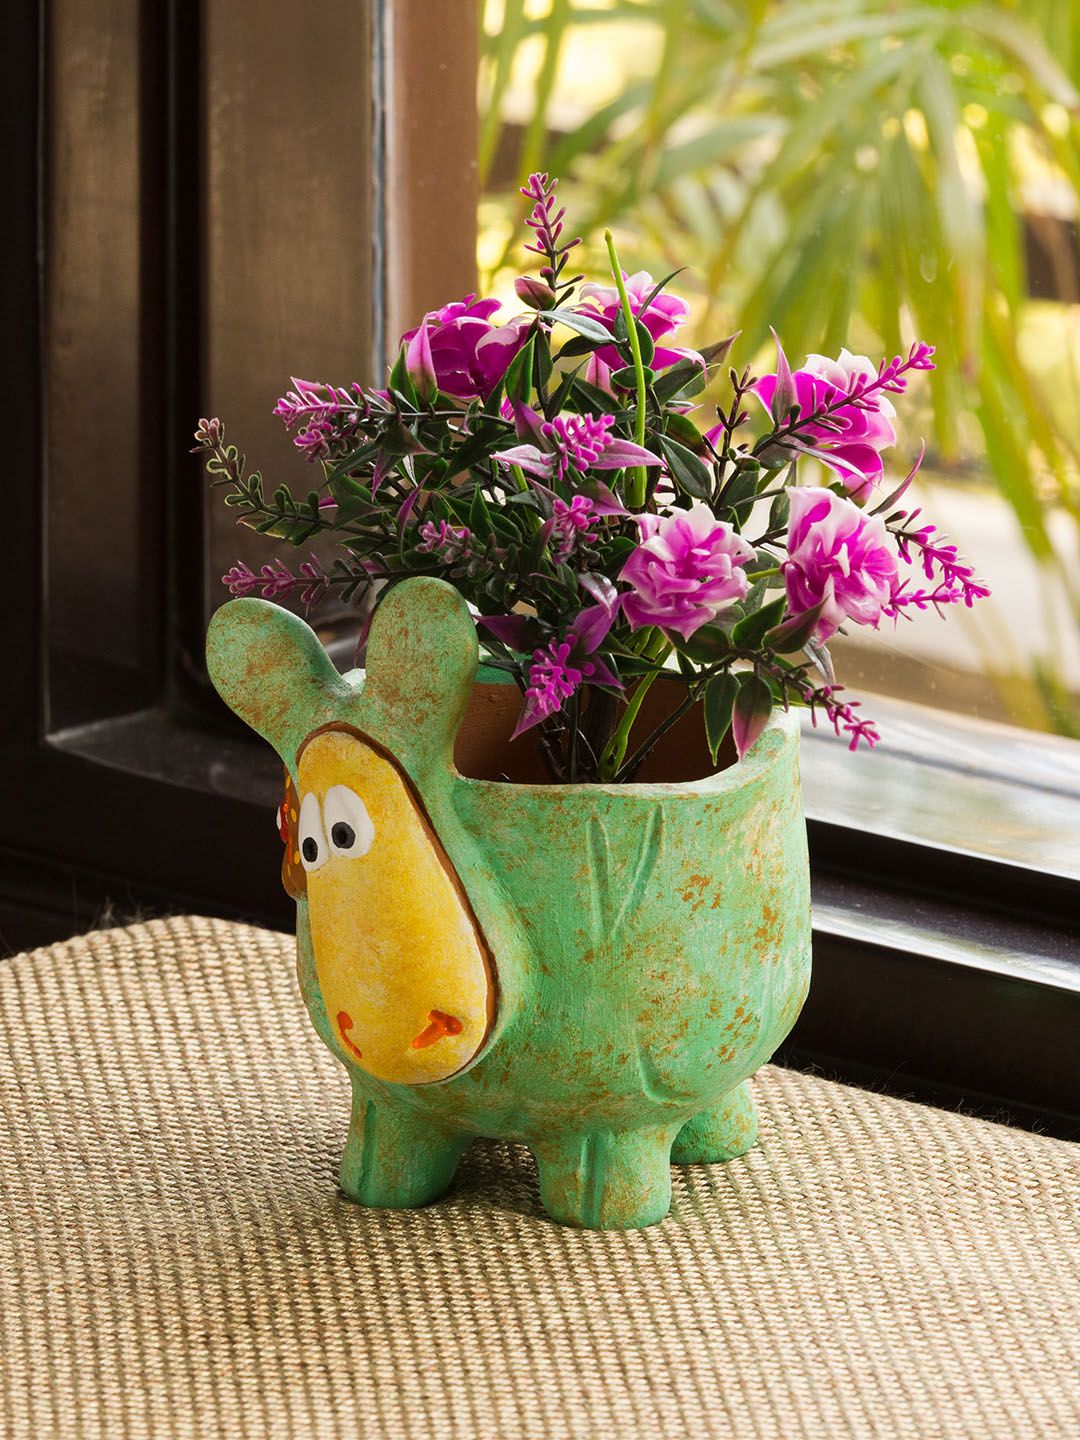 ExclusiveLane Green Curios Sheep Handmade Hand-painted Table Planter Pot In Terracotta Price in India